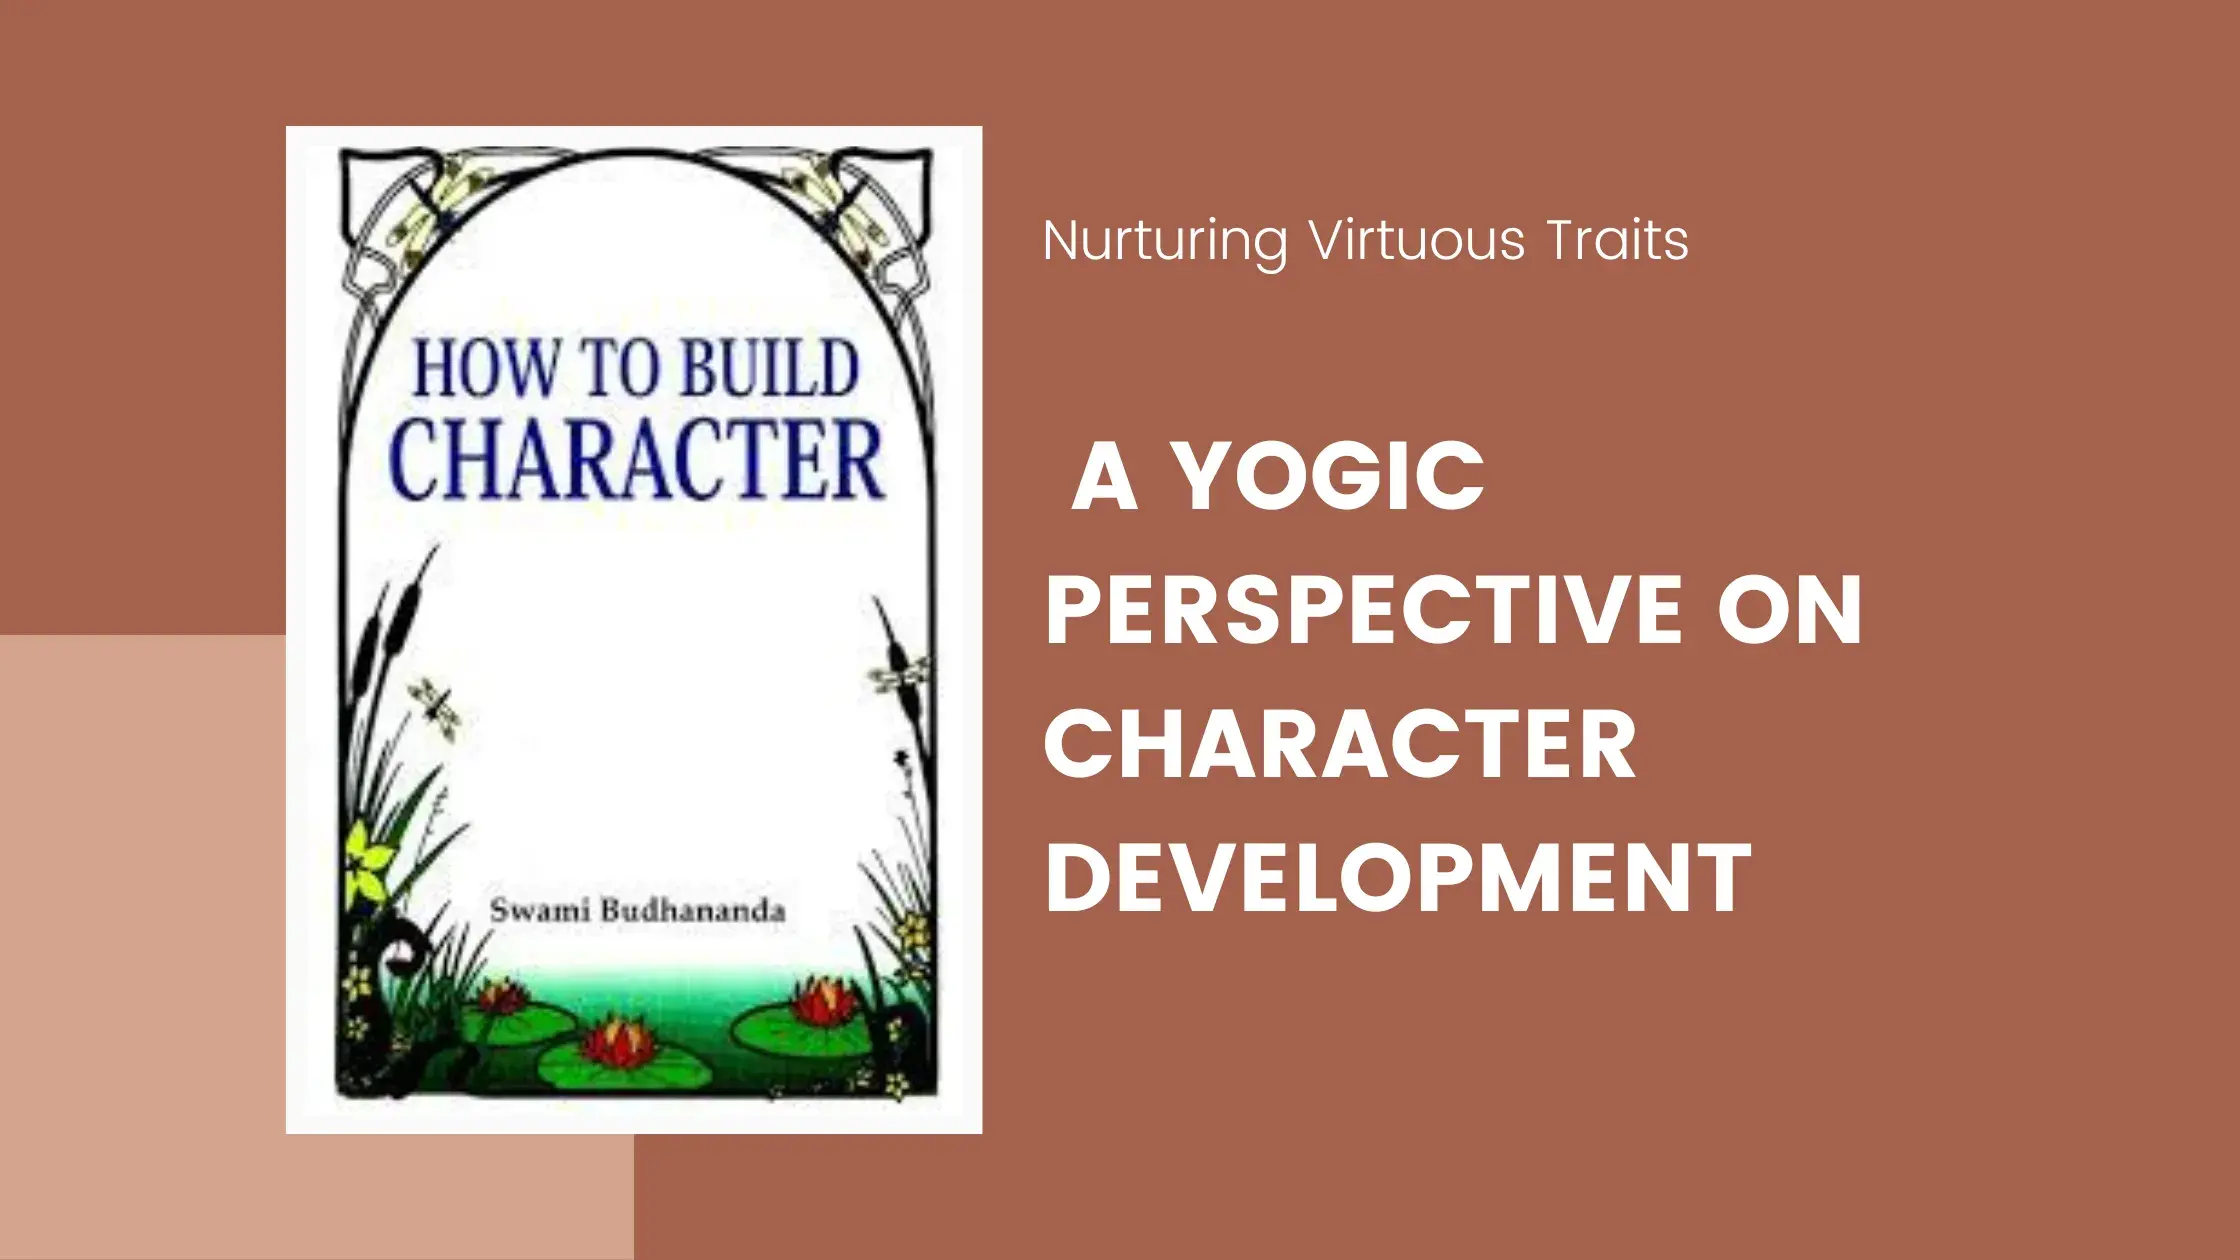 Nurturing Virtuous Traits: A Yogic Perspective on Character Development